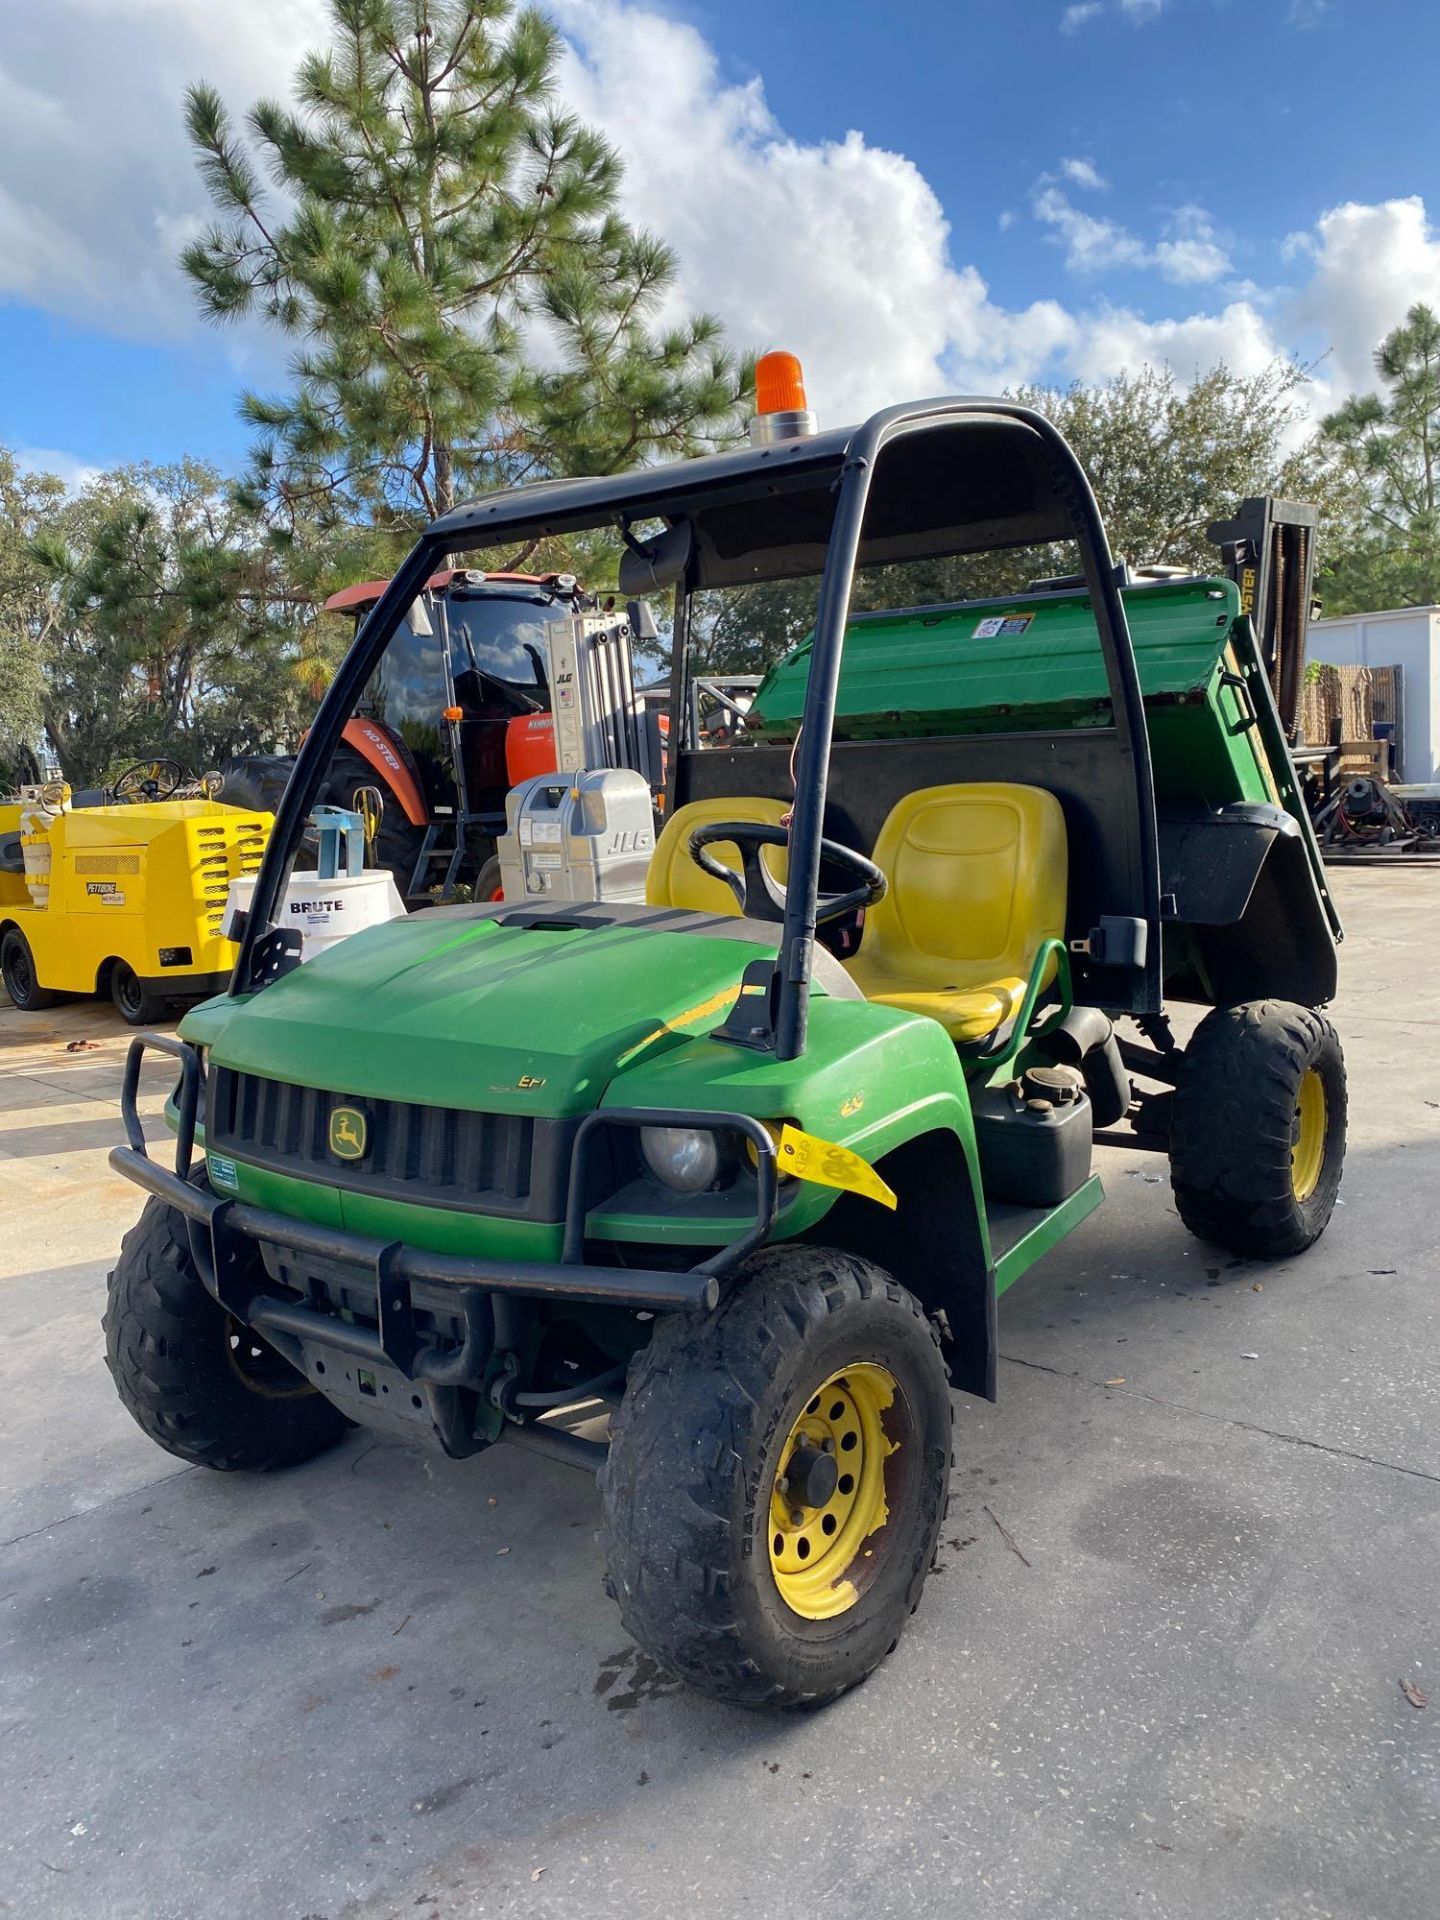 JOHN DEERE GATOR XUV UTILITY CART WITH HYDRAULIC DUMP BED, GAS POWERED, 1,713 HOURS SHOWING 4x4 - Image 2 of 9